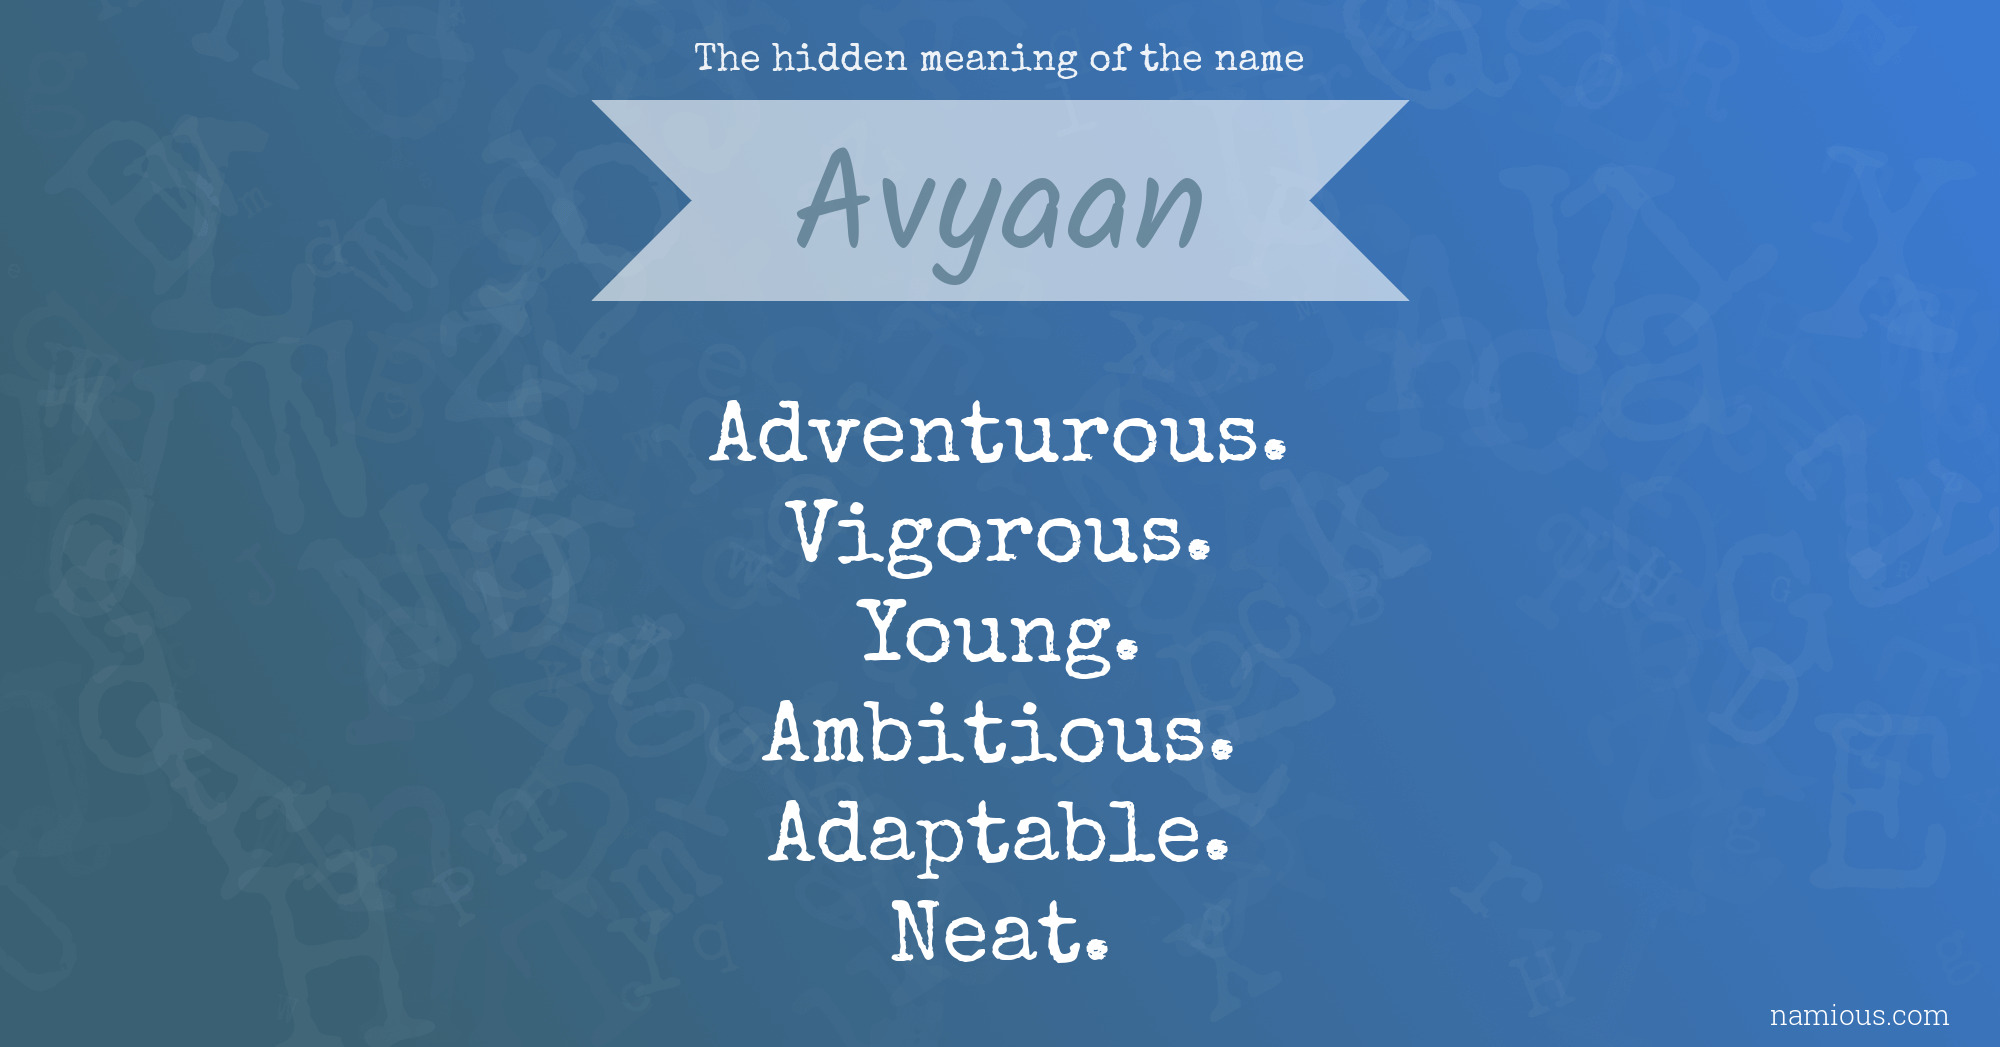 The hidden meaning of the name Avyaan